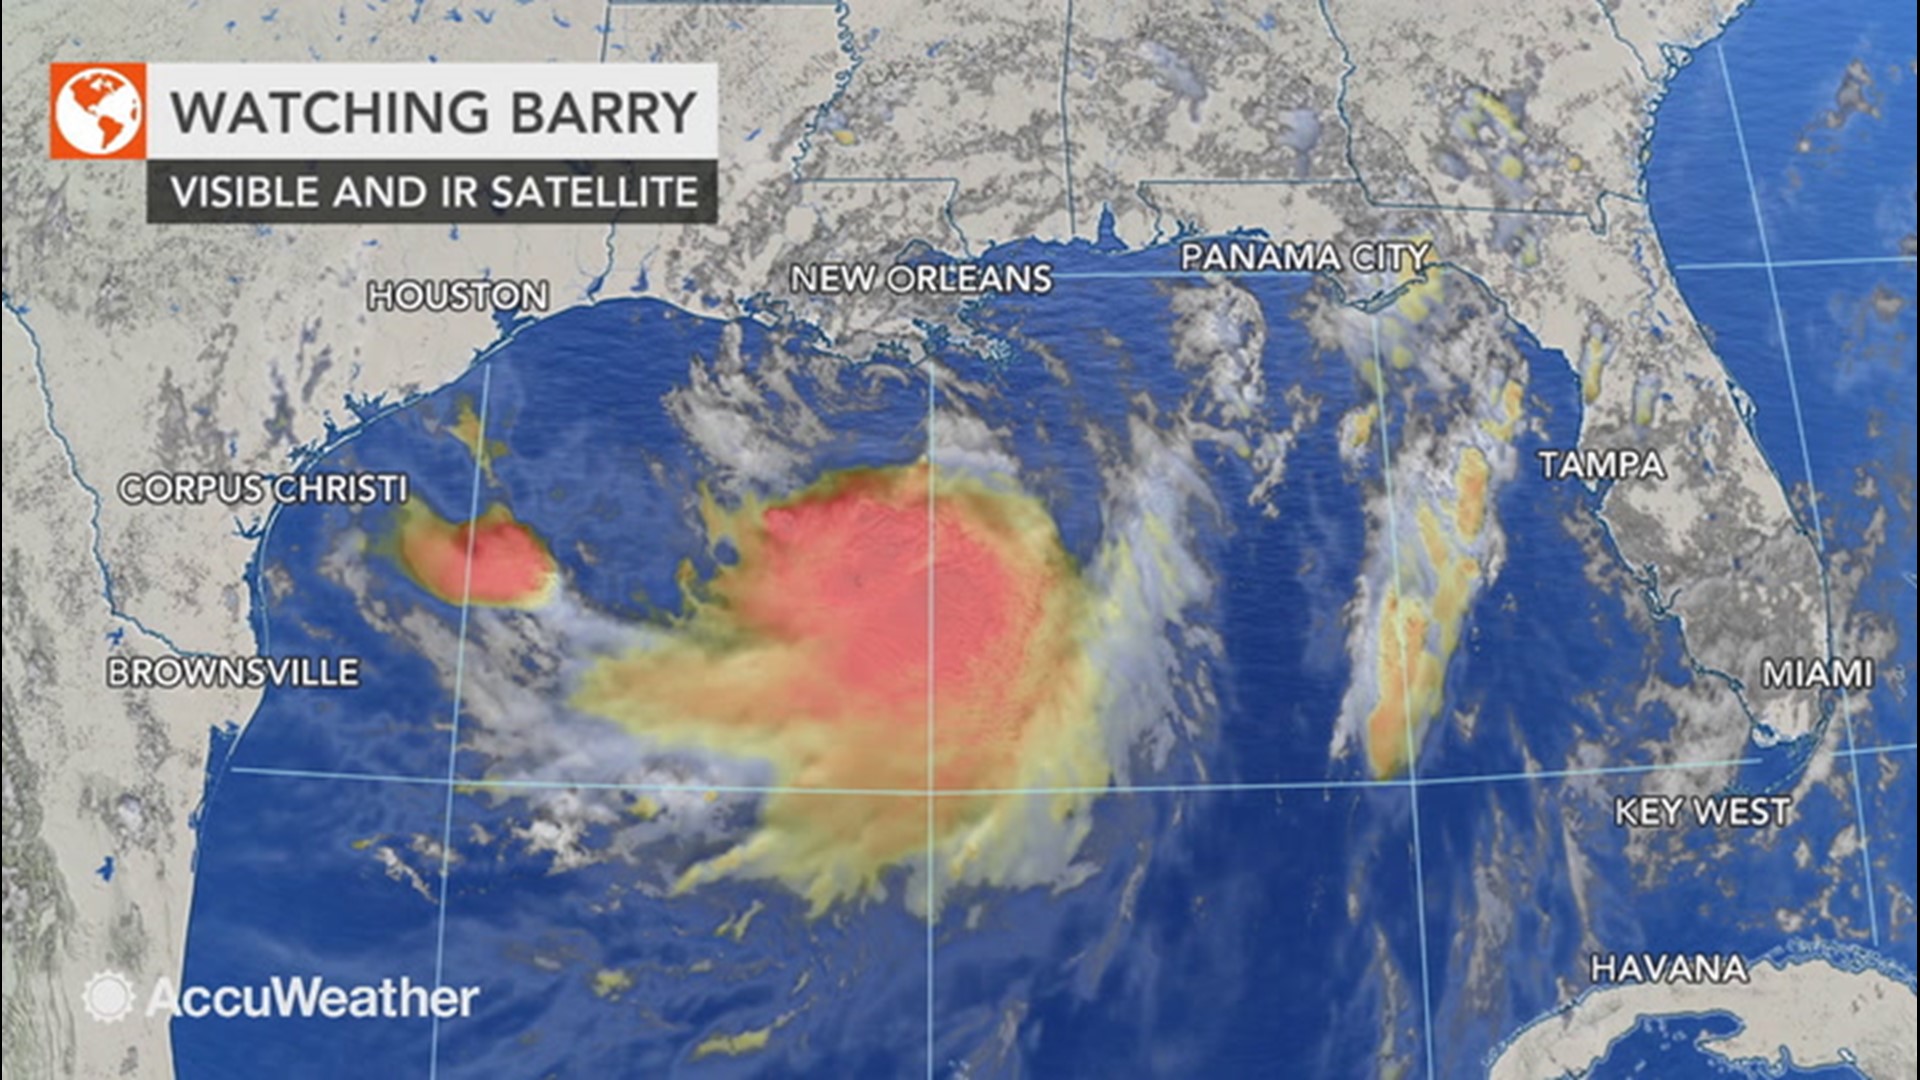 Satellite imagery of Tropical Storm Barry shows the massive system tracking through the Gulf of Mexico as it approaches landfall on the Louisiana coast.